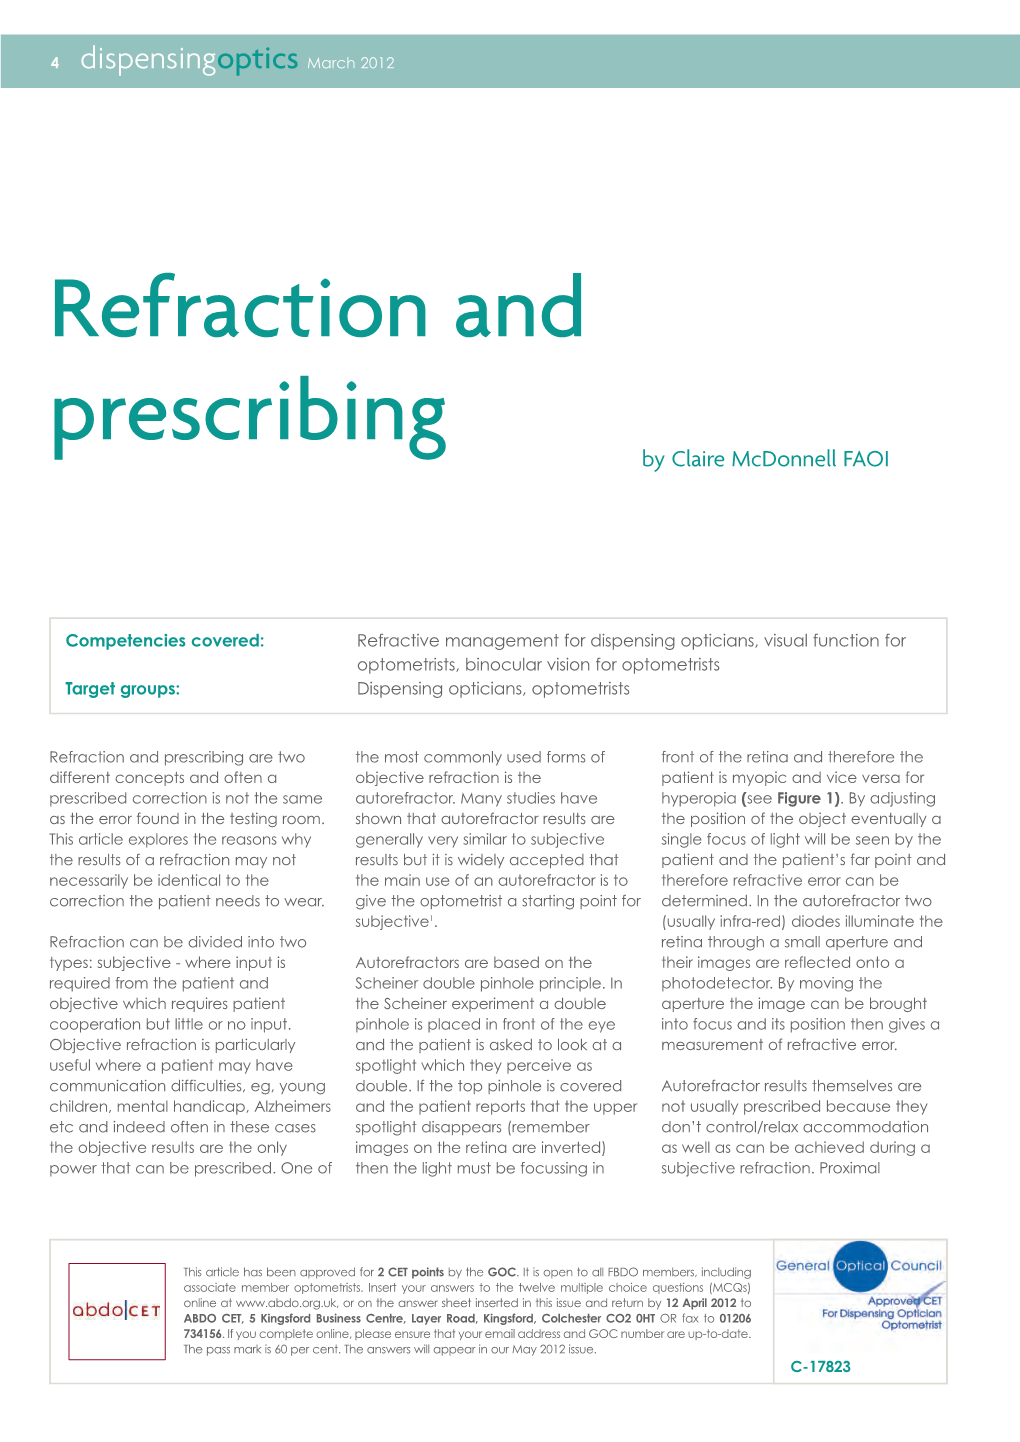 Refraction and Prescribing by Claire Mcdonnell FAOI